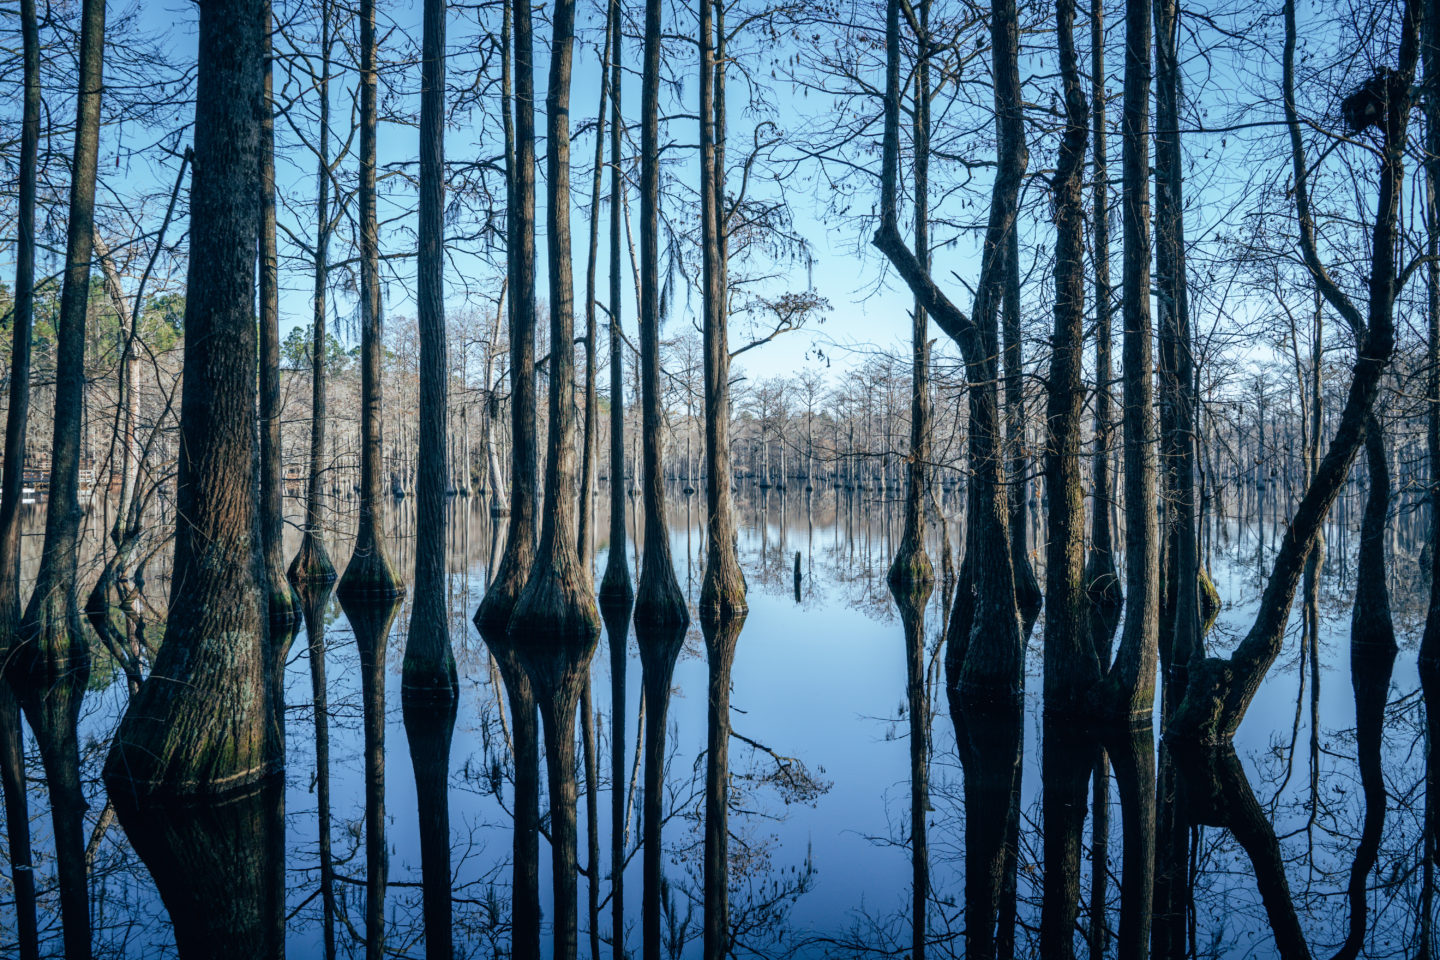 Cypress trees growing in a swamp with their reflections 